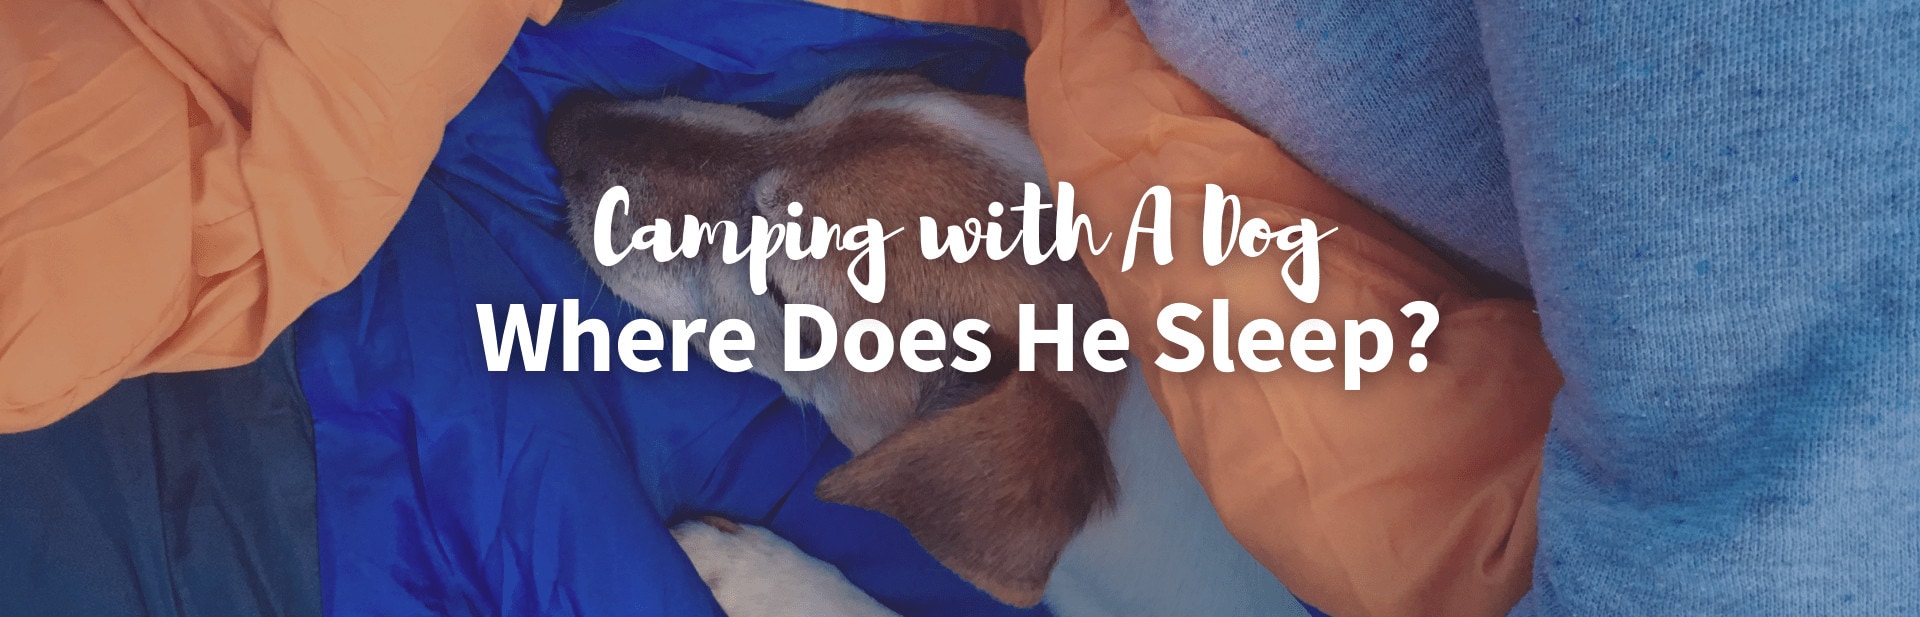 Camping with a Dog: Where Does He Sleep?